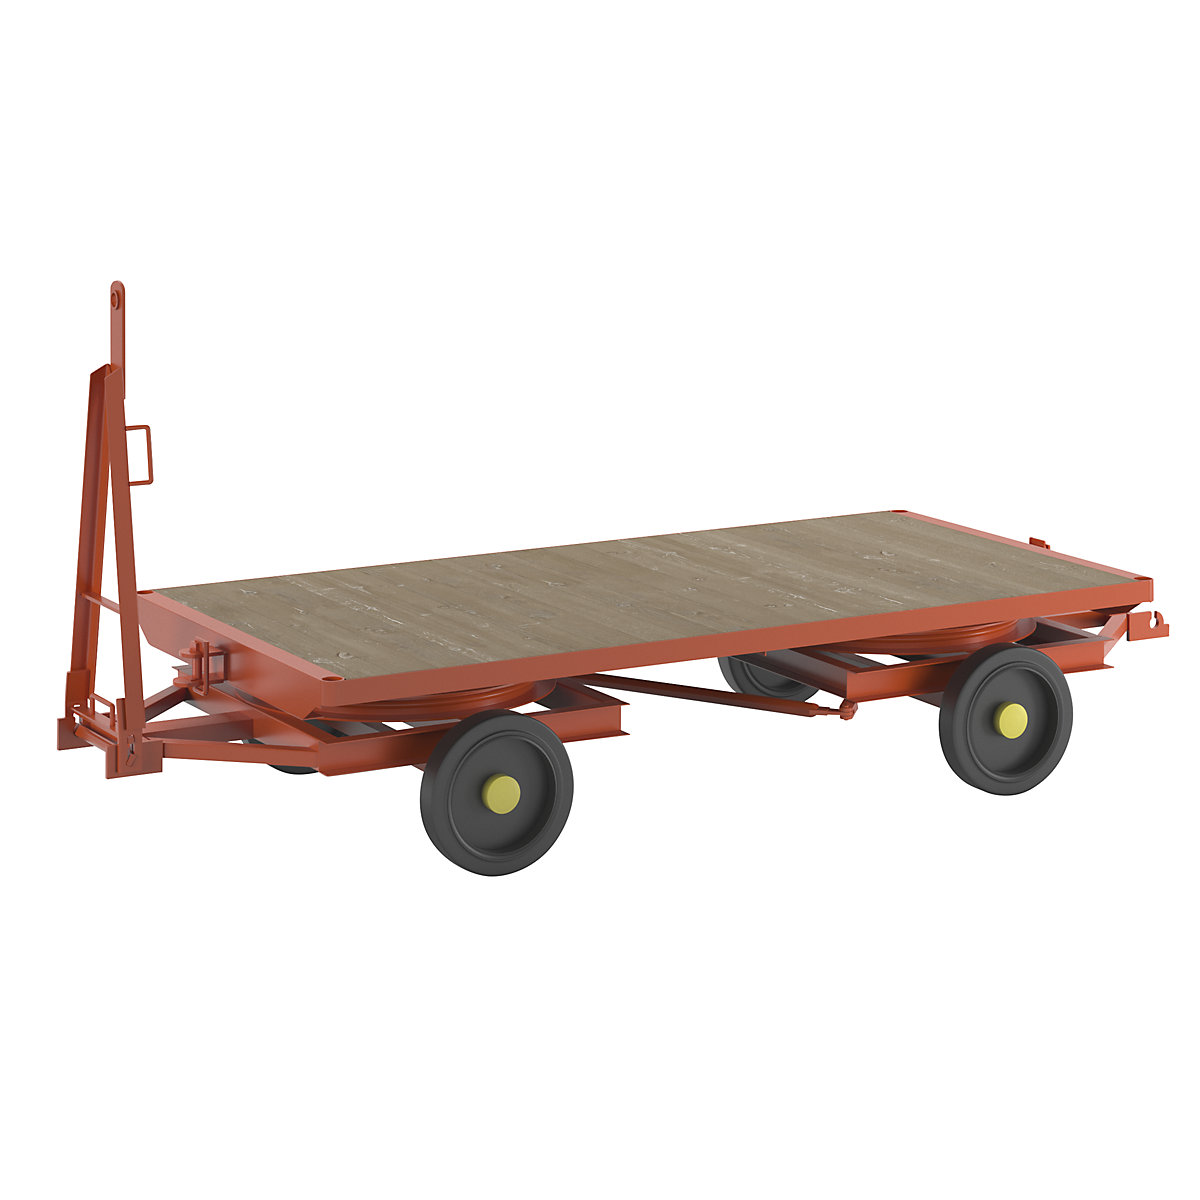 Trailer, 4-wheel double turntable steering, max. load 3 t, platform 2.5 x 1.25 m, solid rubber tyres-1